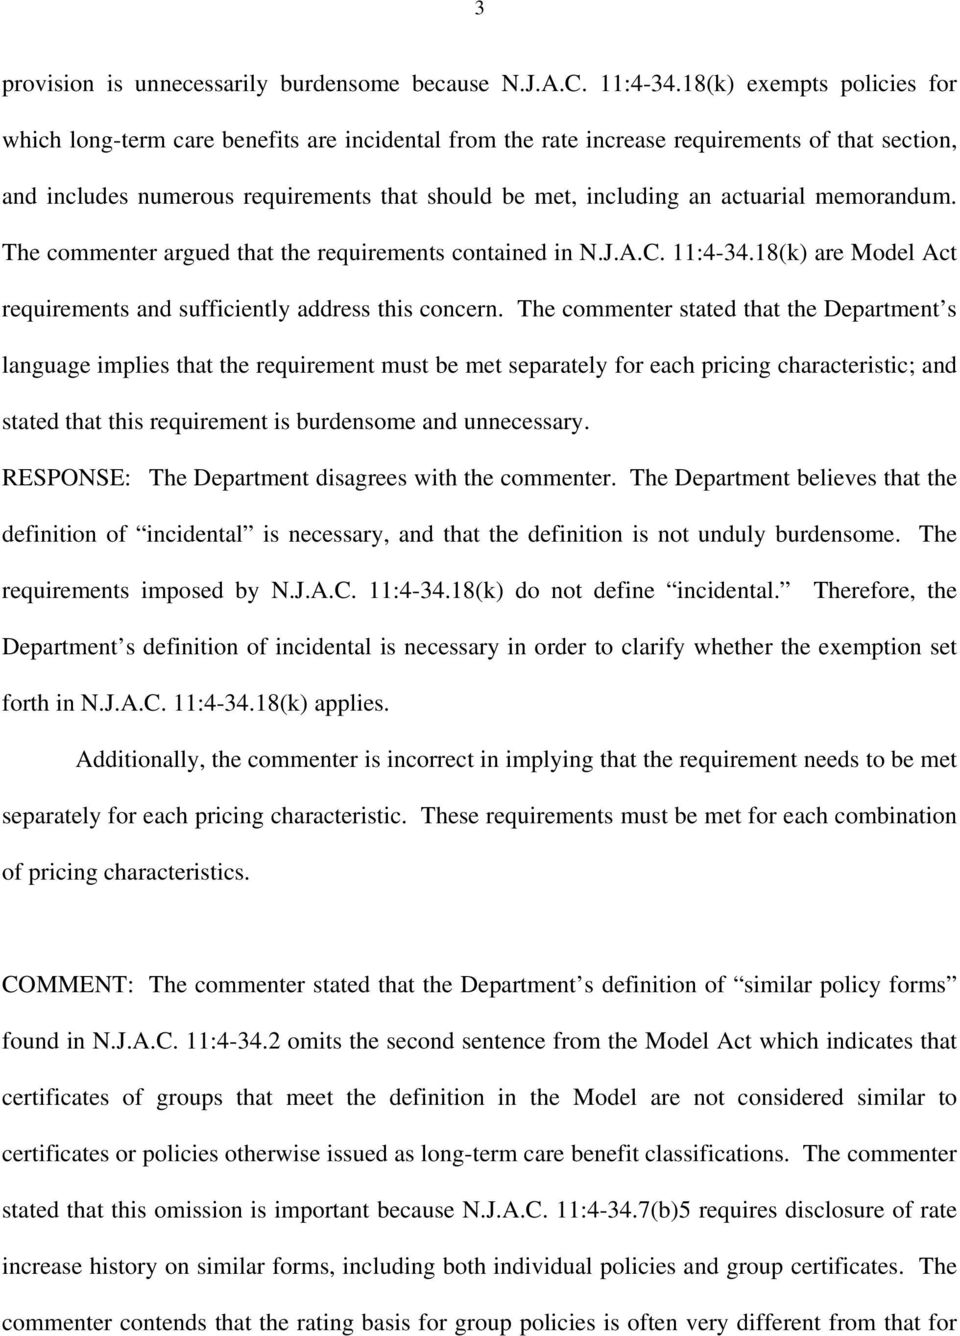 actuarial memorandum. The commenter argued that the requirements contained in N.J.A.C. 11:4-34.18(k) are Model Act requirements and sufficiently address this concern.